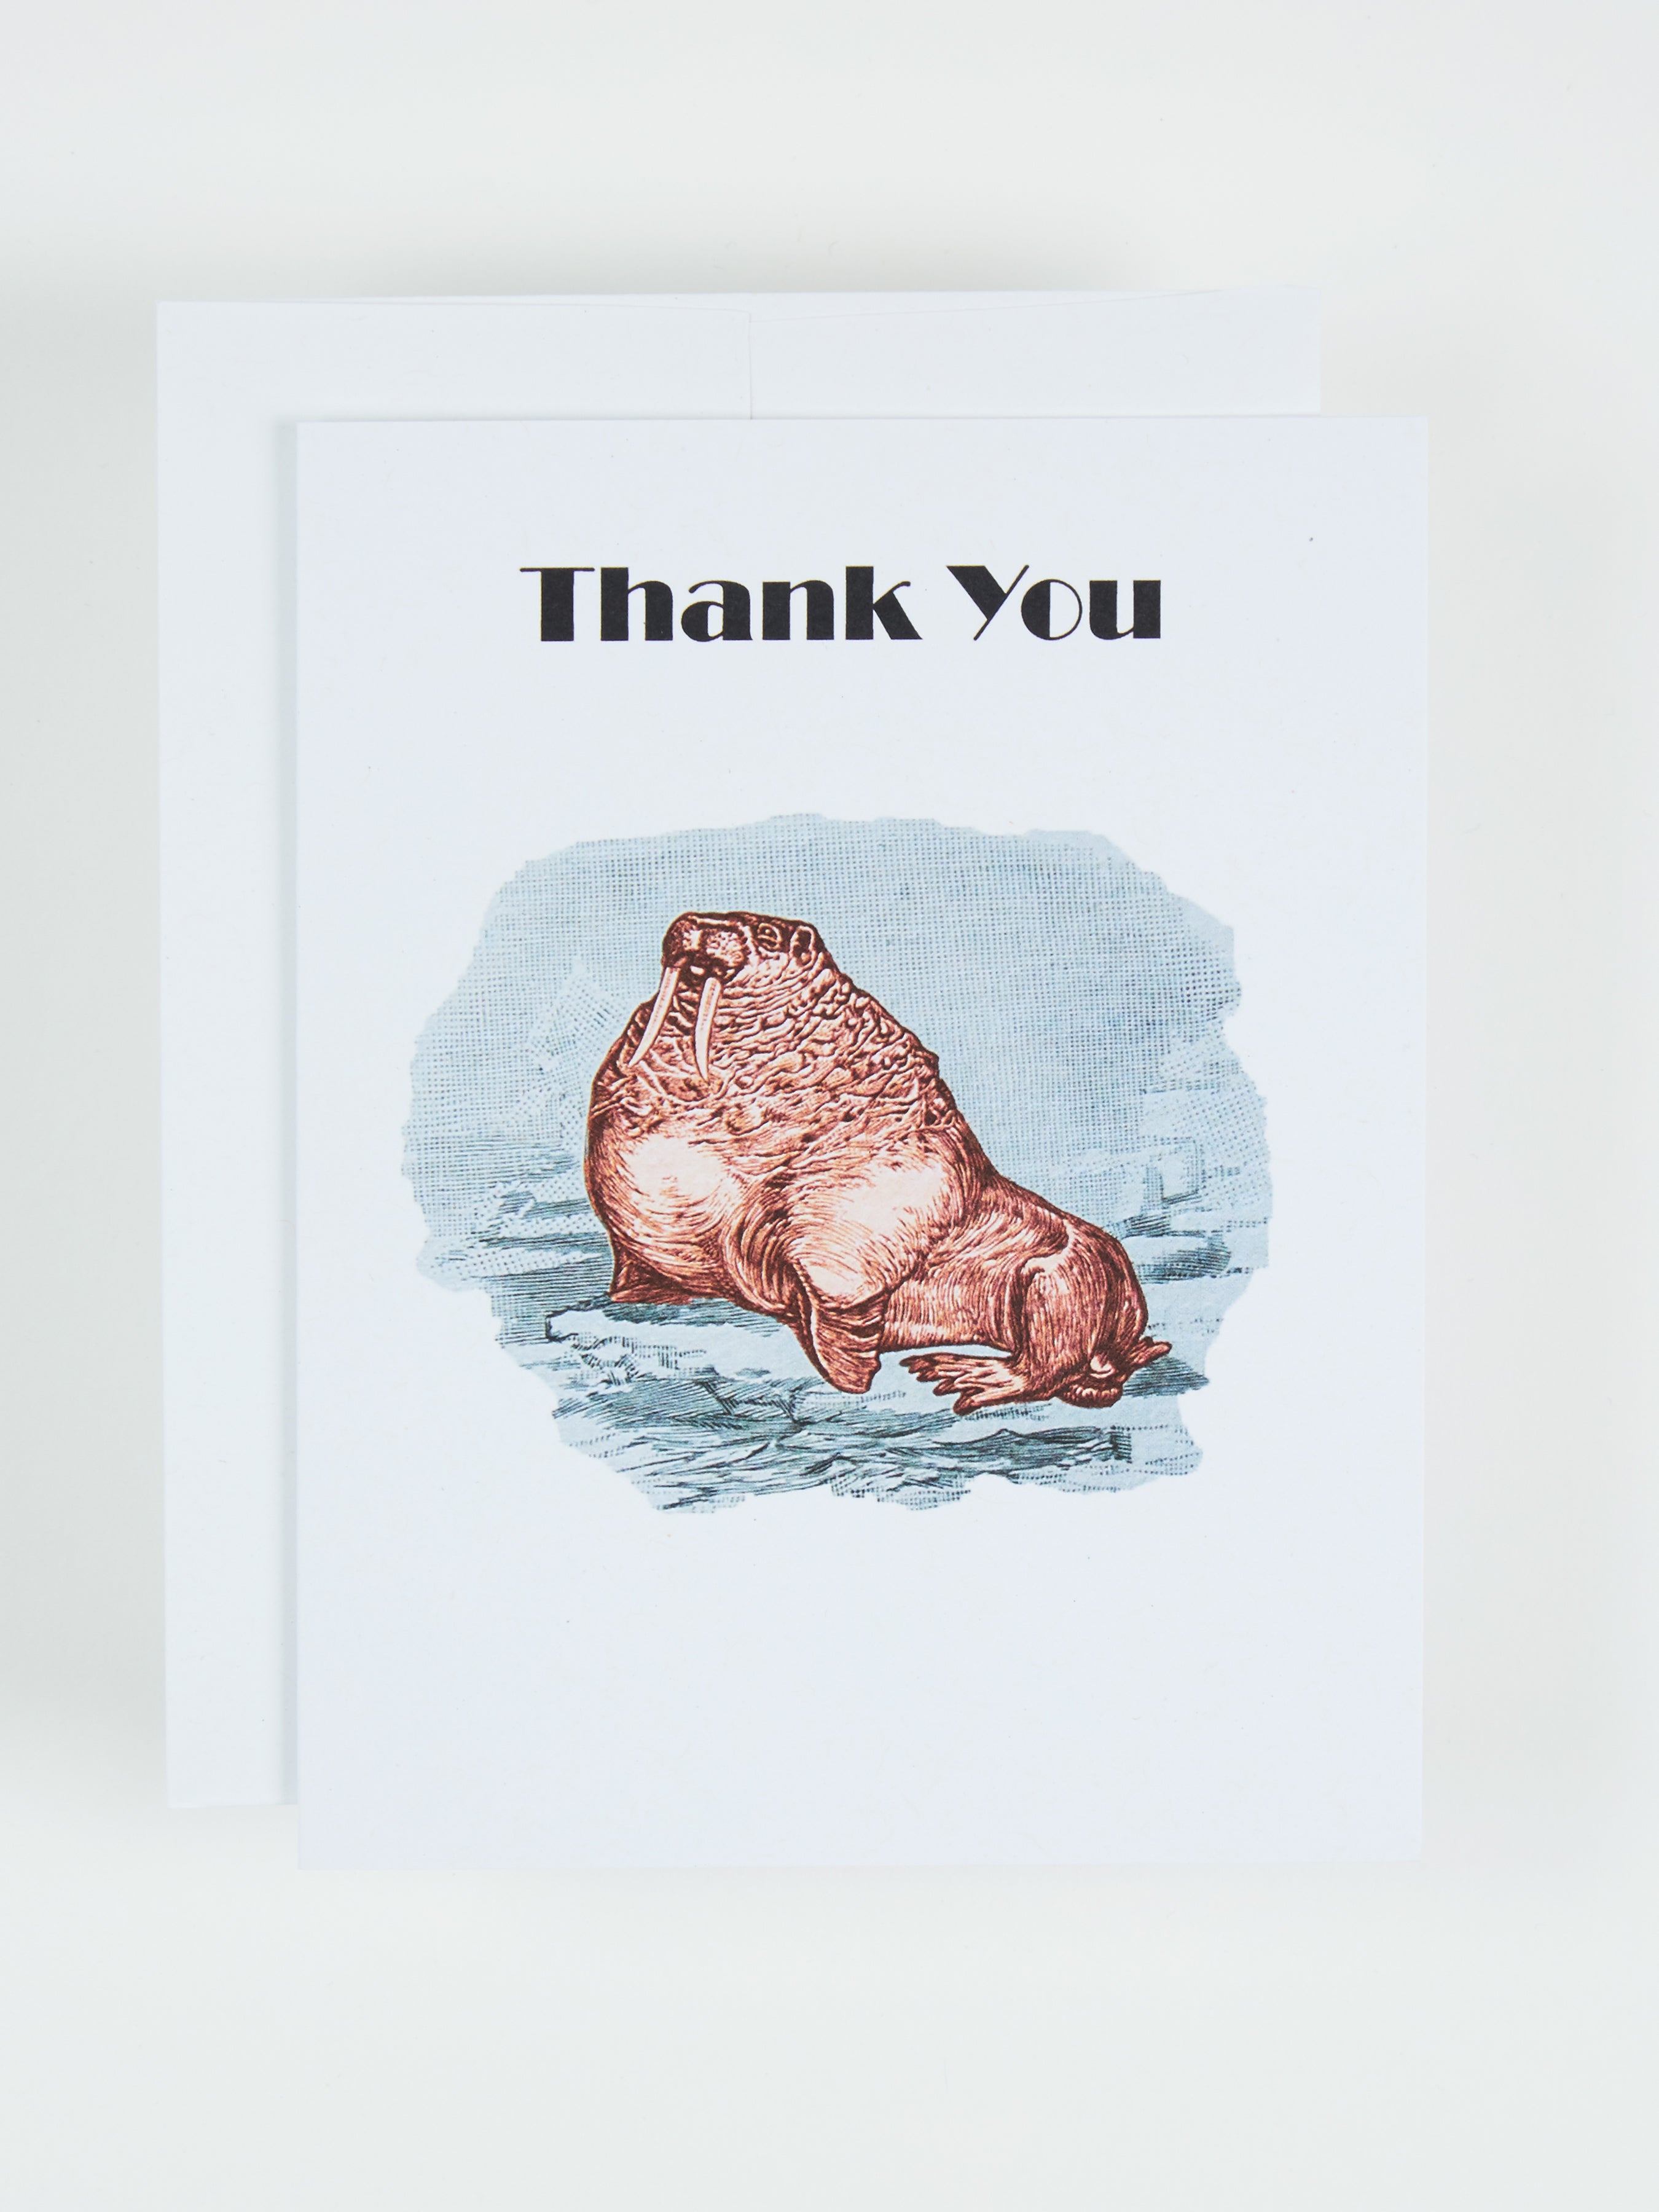 Greeting card with the text Thank You above a regal walrus